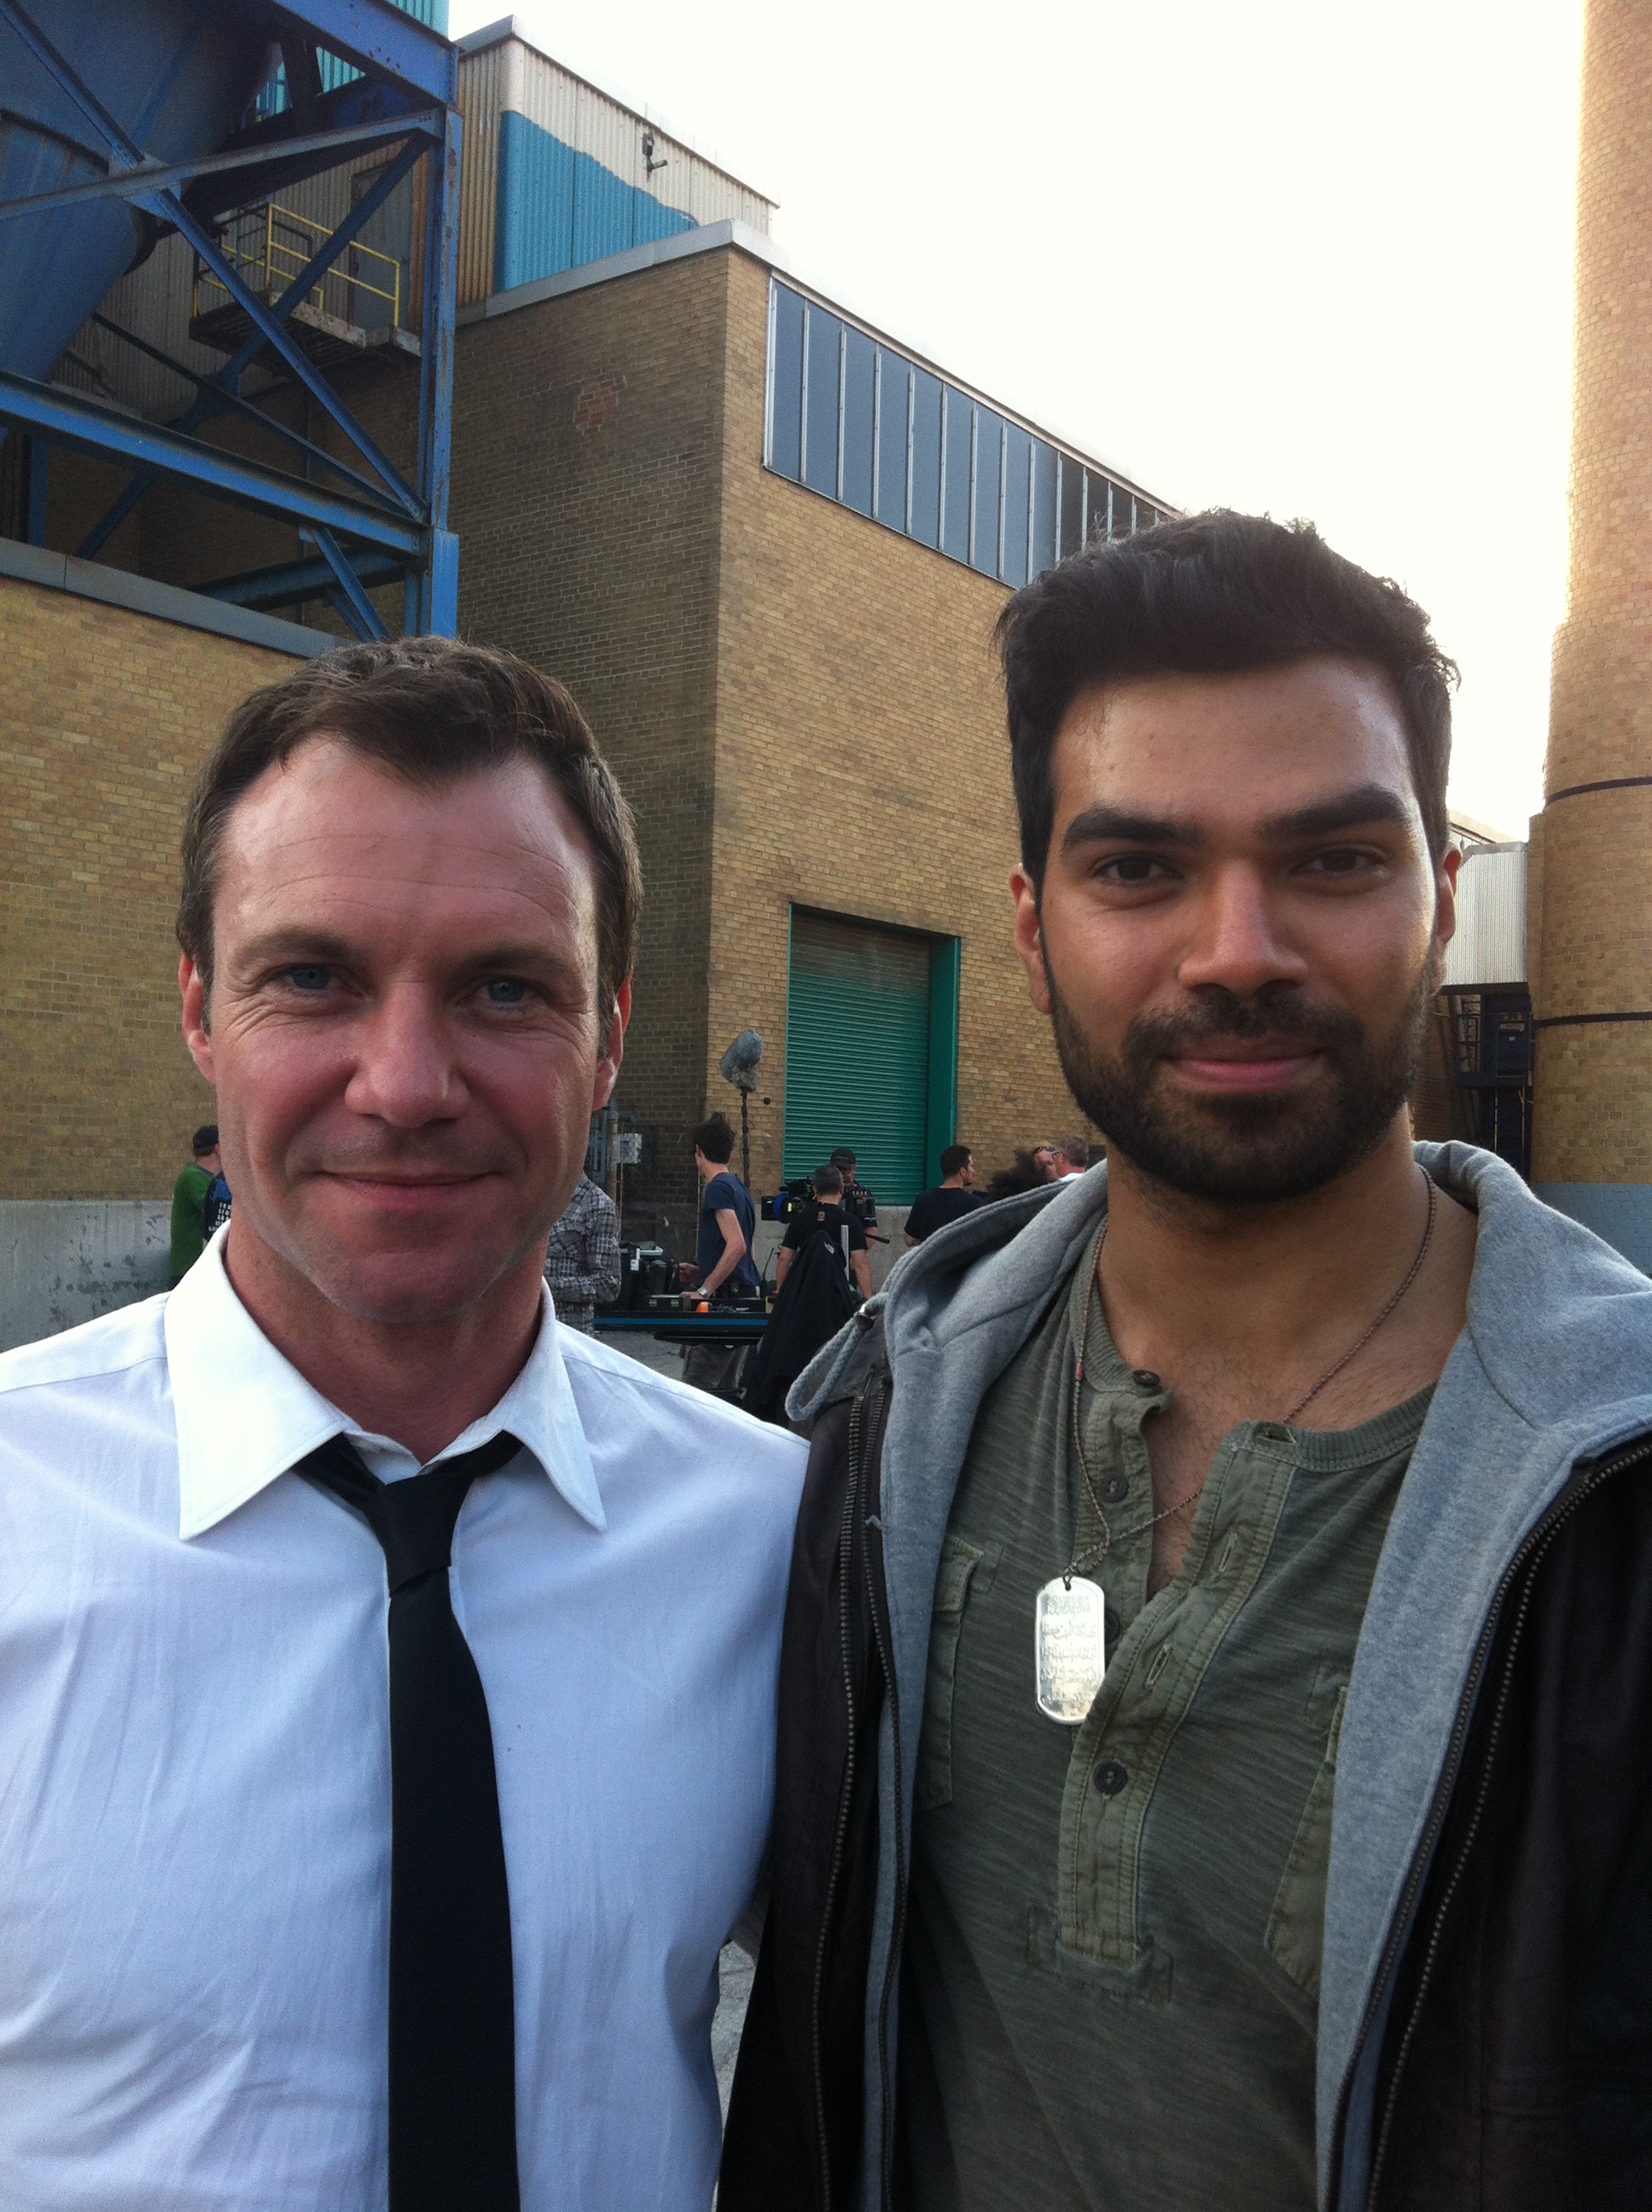 Chris Vance and RJ Parrish on the set of The Transporter the series.